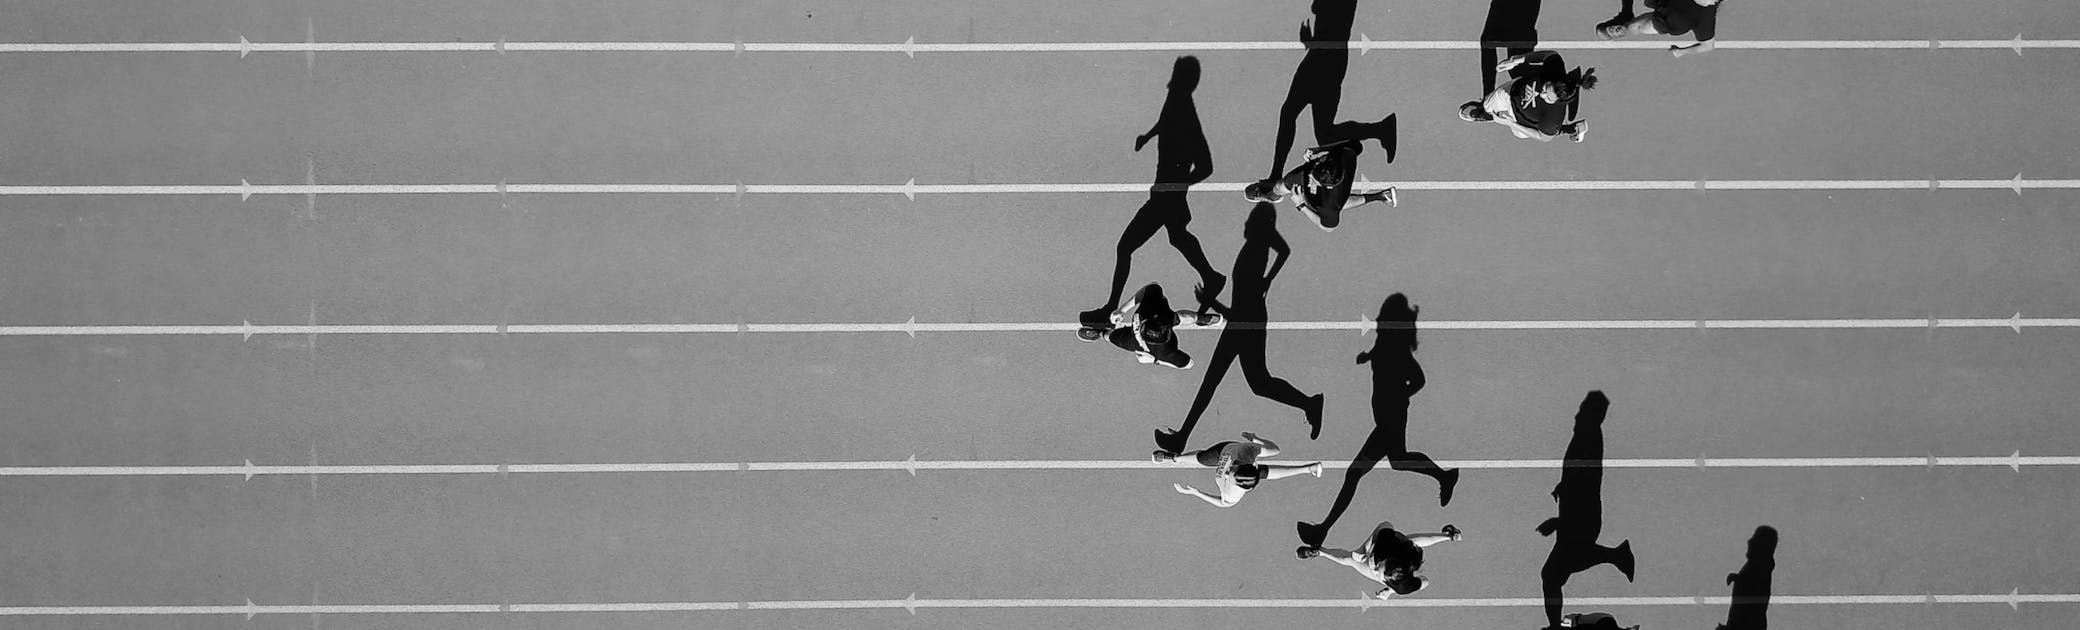 Overhead view of a heat of sprinters running on a track in v-formation